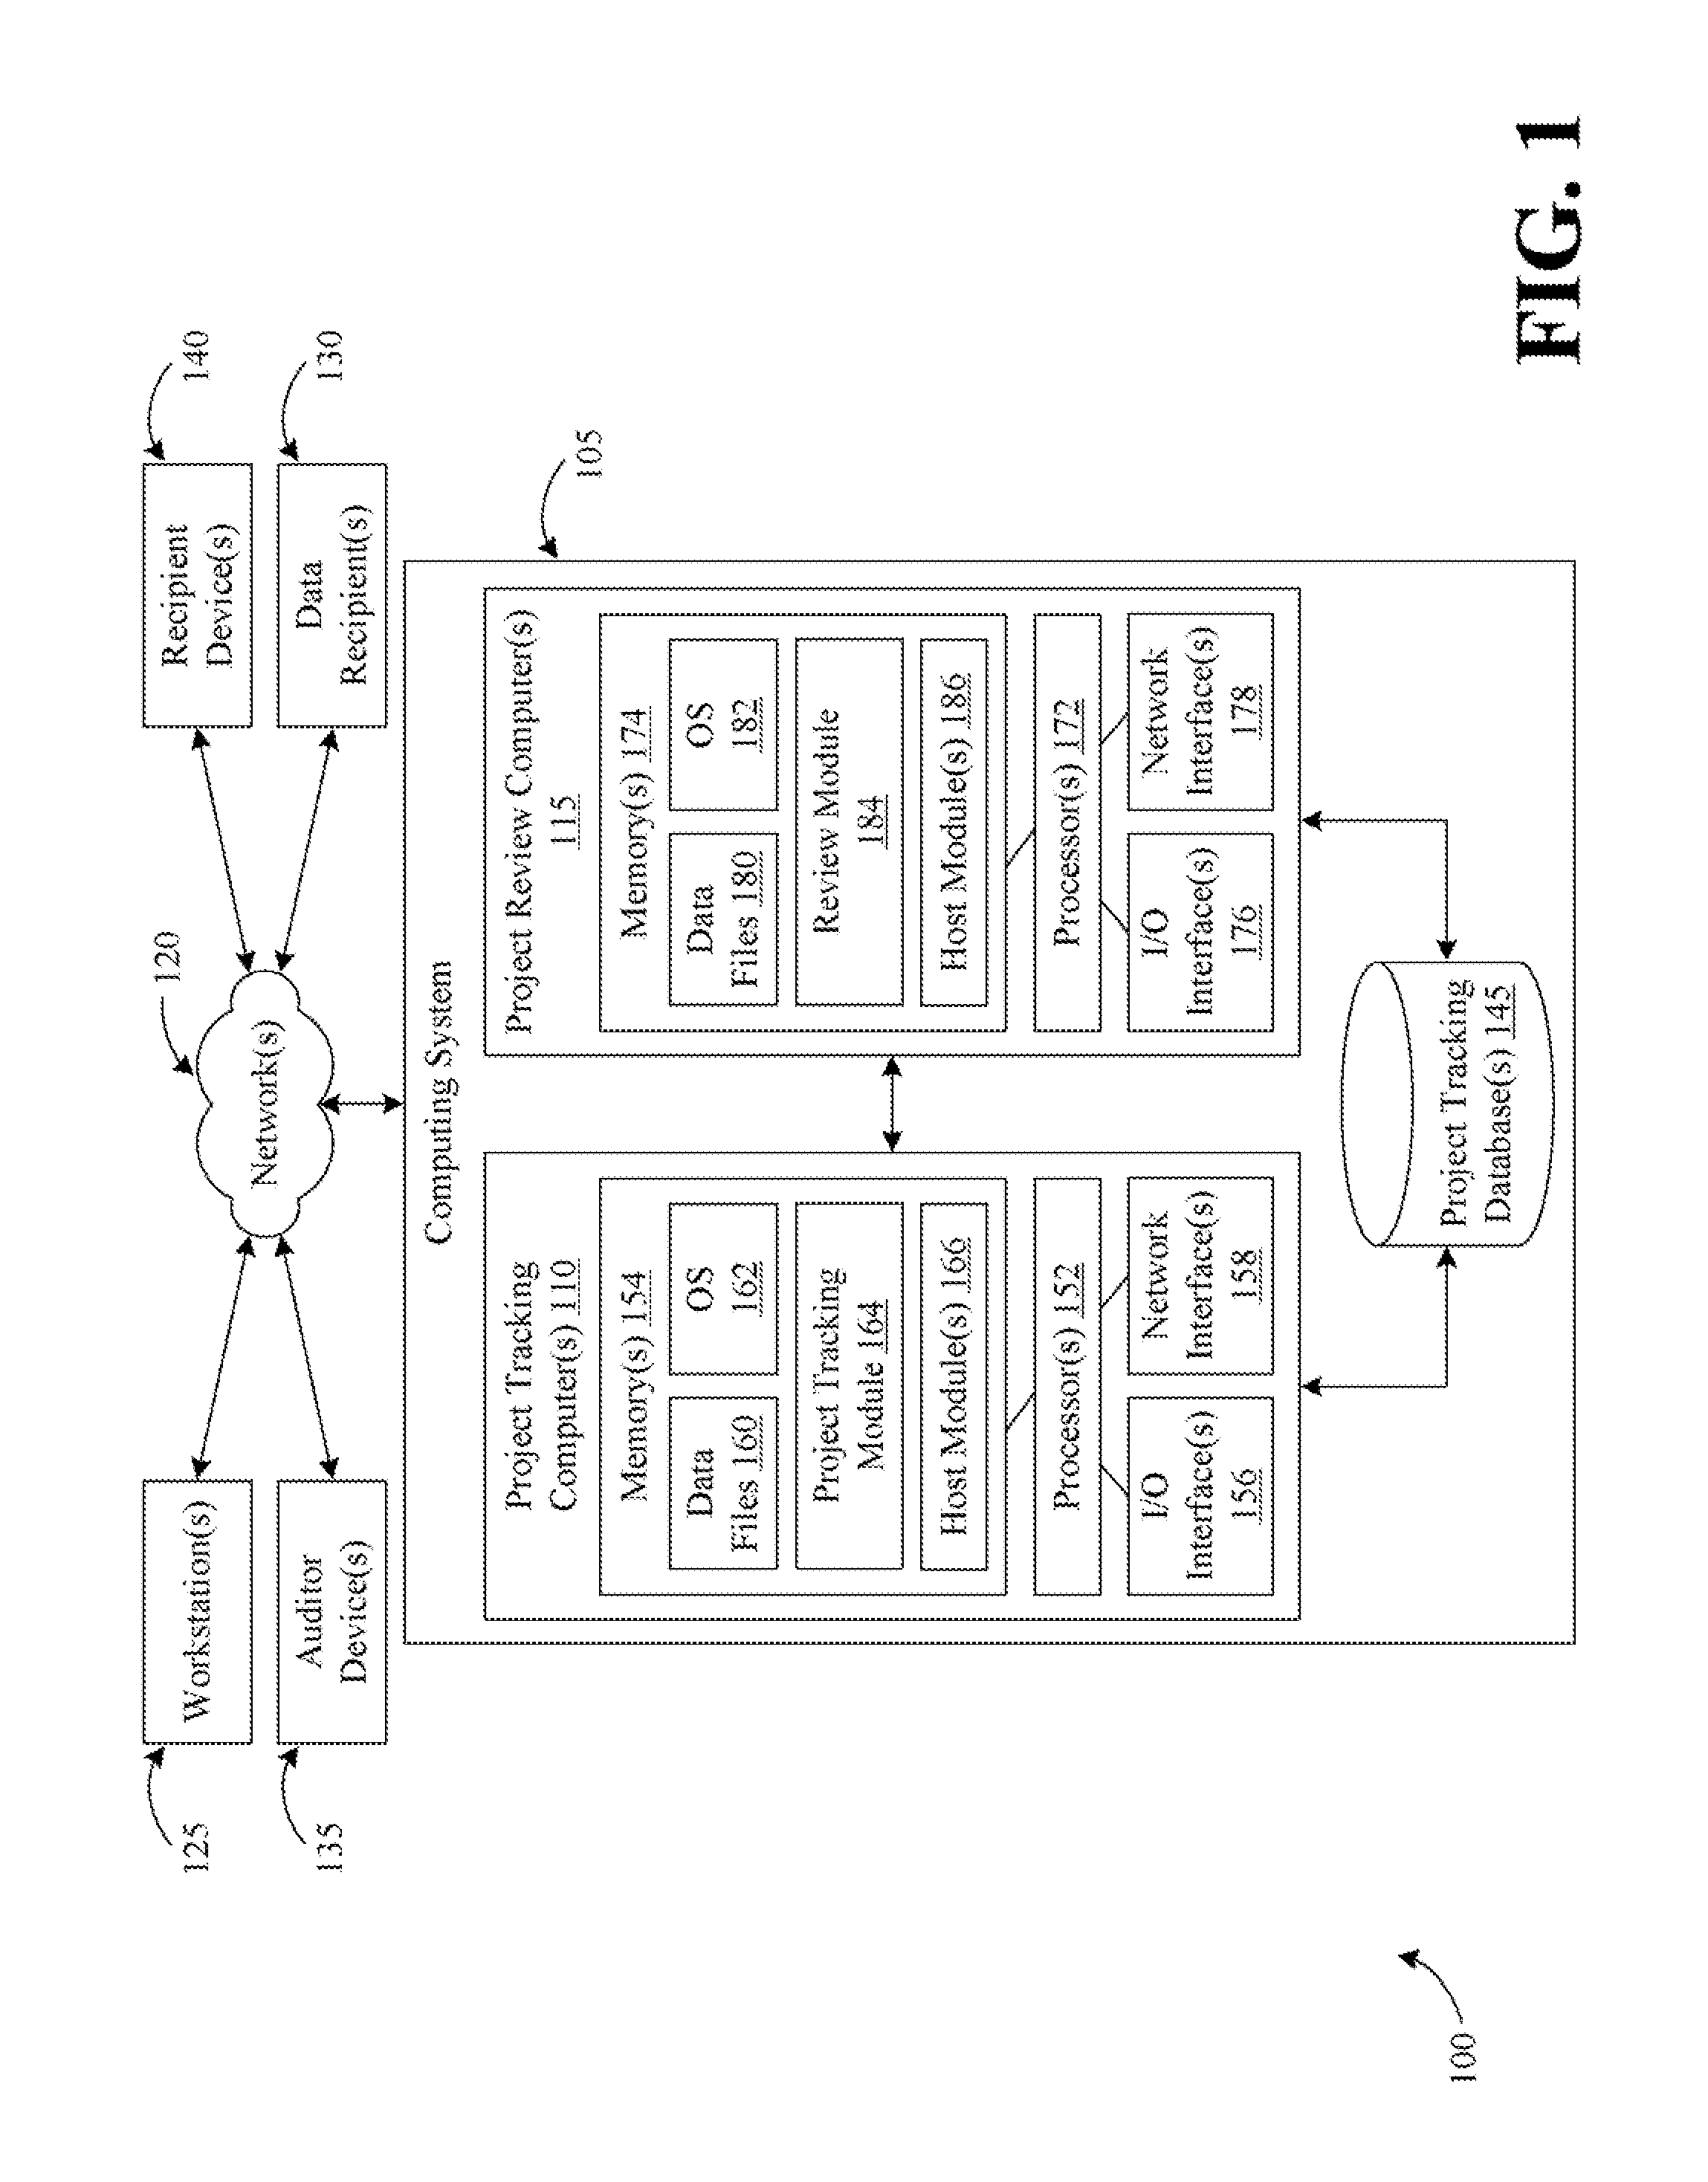 Systems and methods for evaluating adherence to a project control process